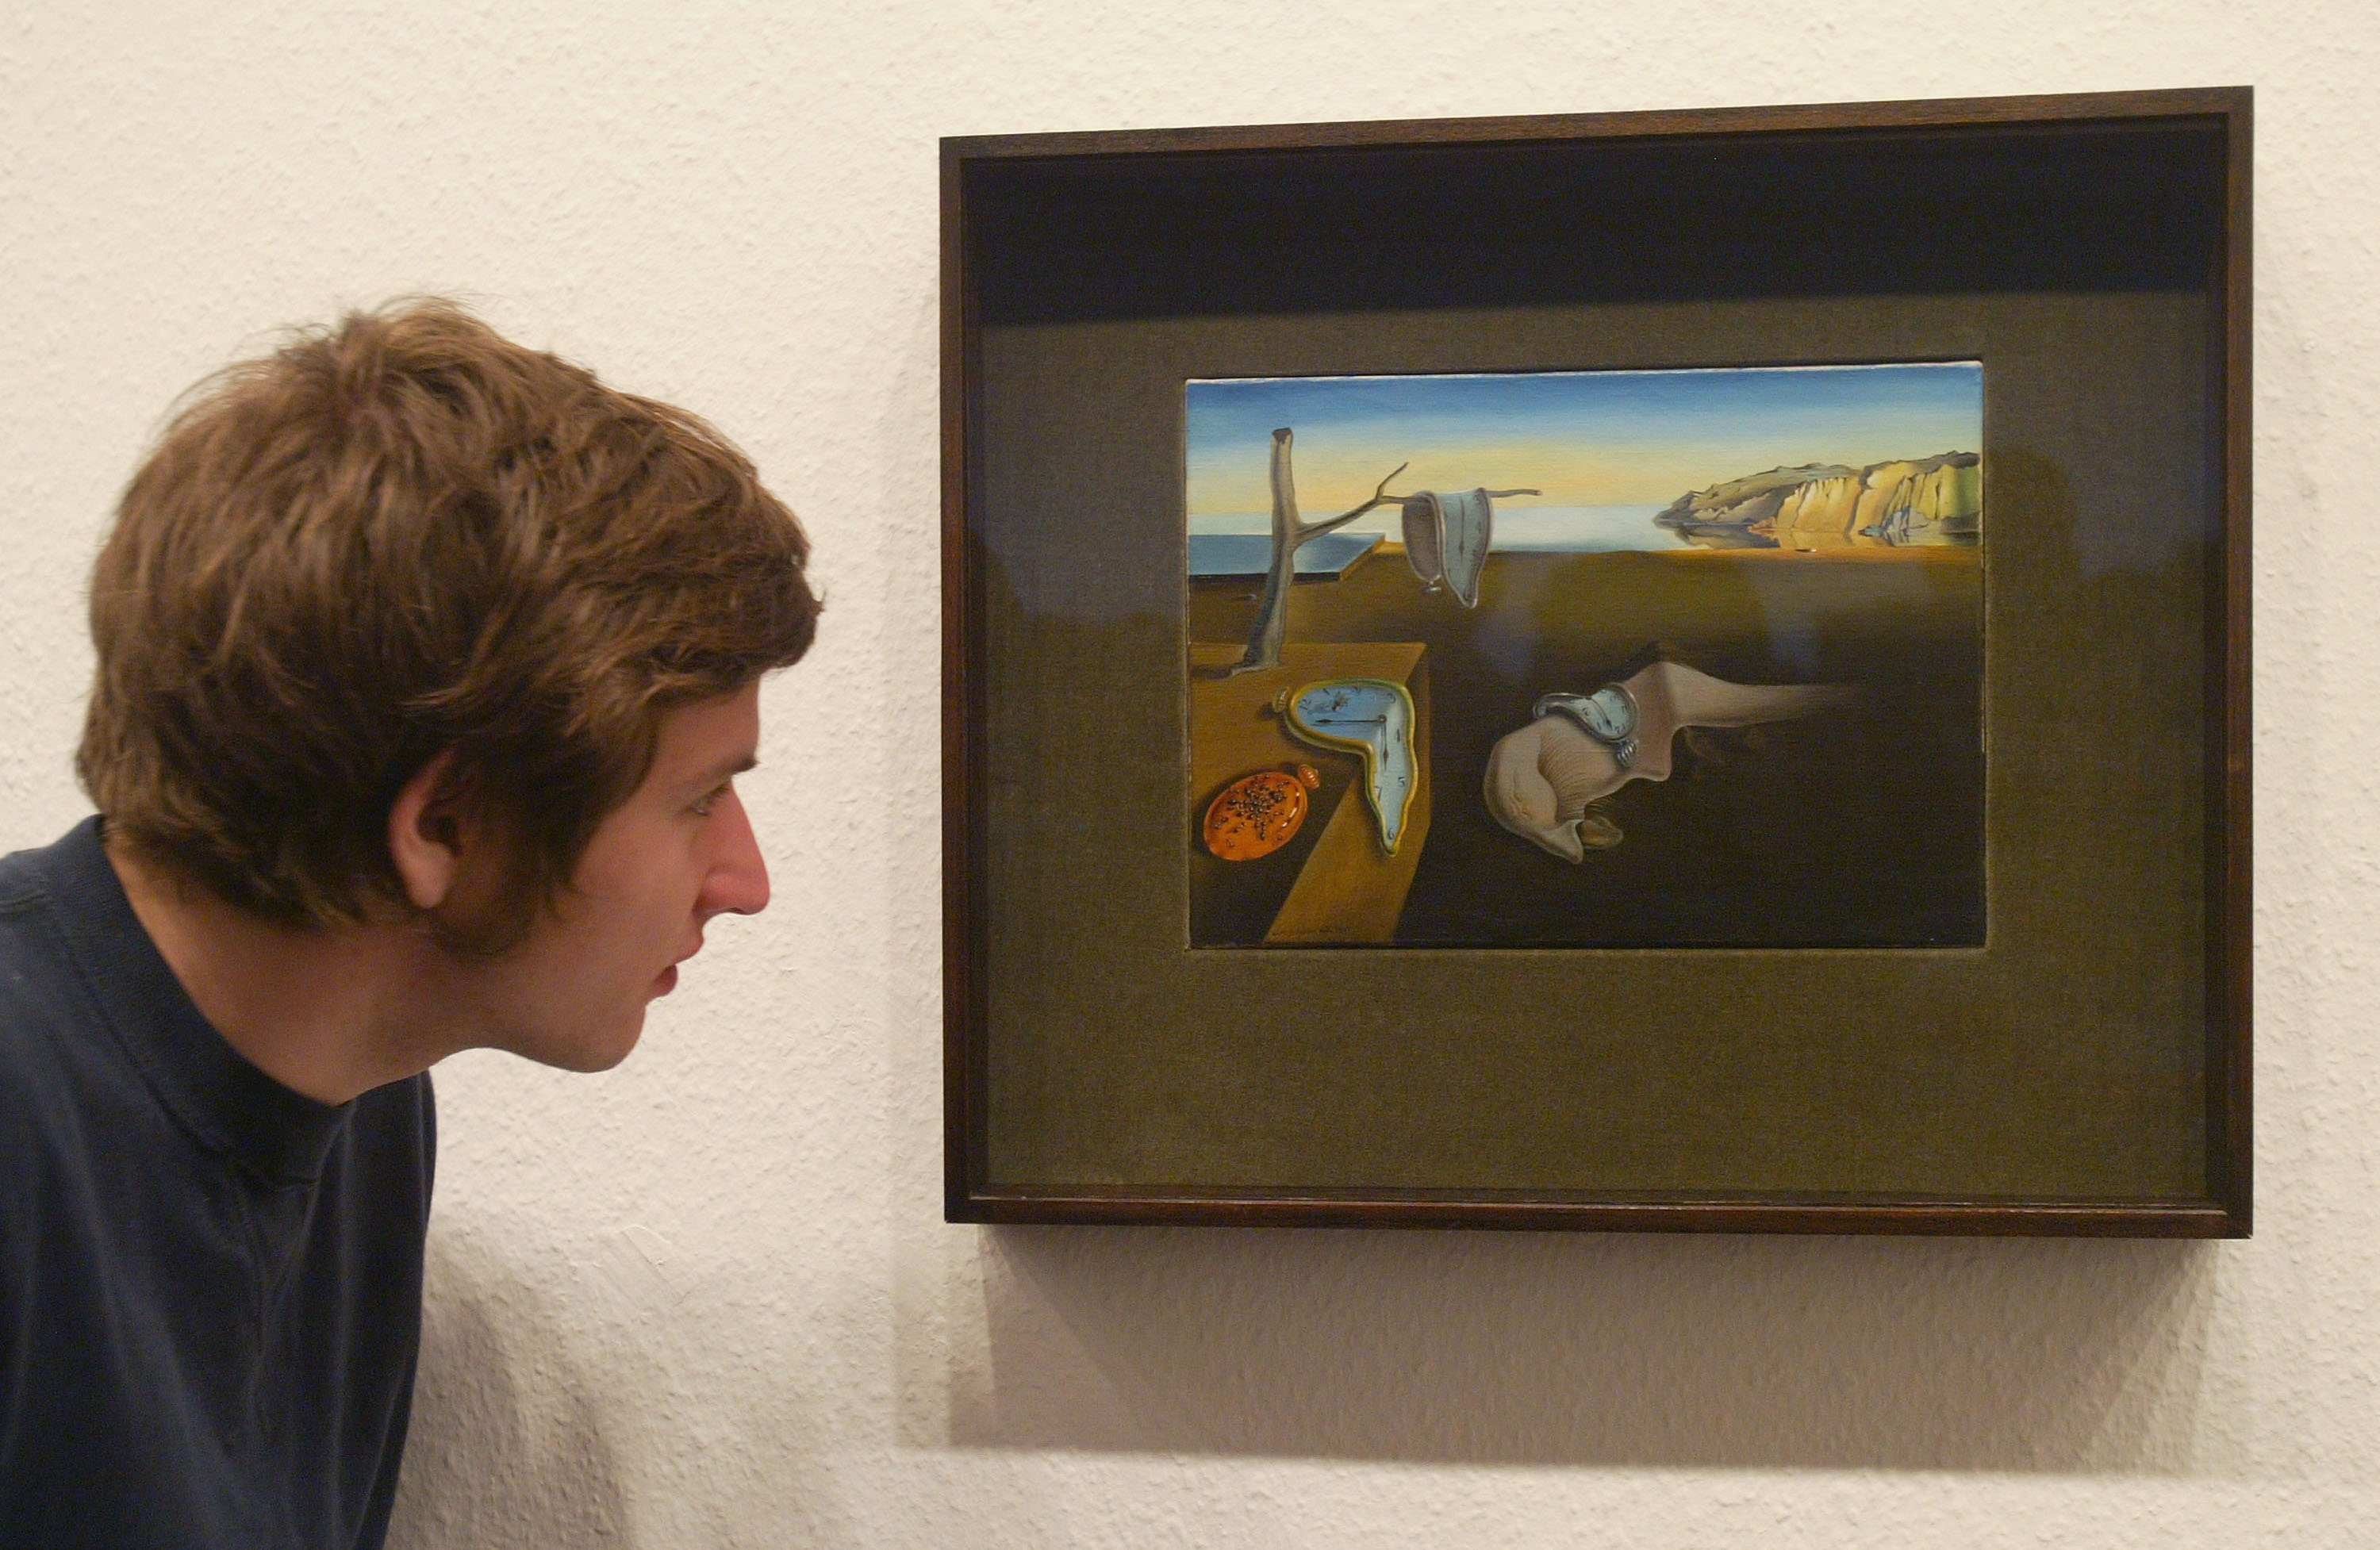 A visitor takes a look at Salvador Dali's "The Persistence of Memory" at the MoMA exhibit, on March 24, 2004 in Berlin, Germany. Photo: Sean Gallup/Getty Images.